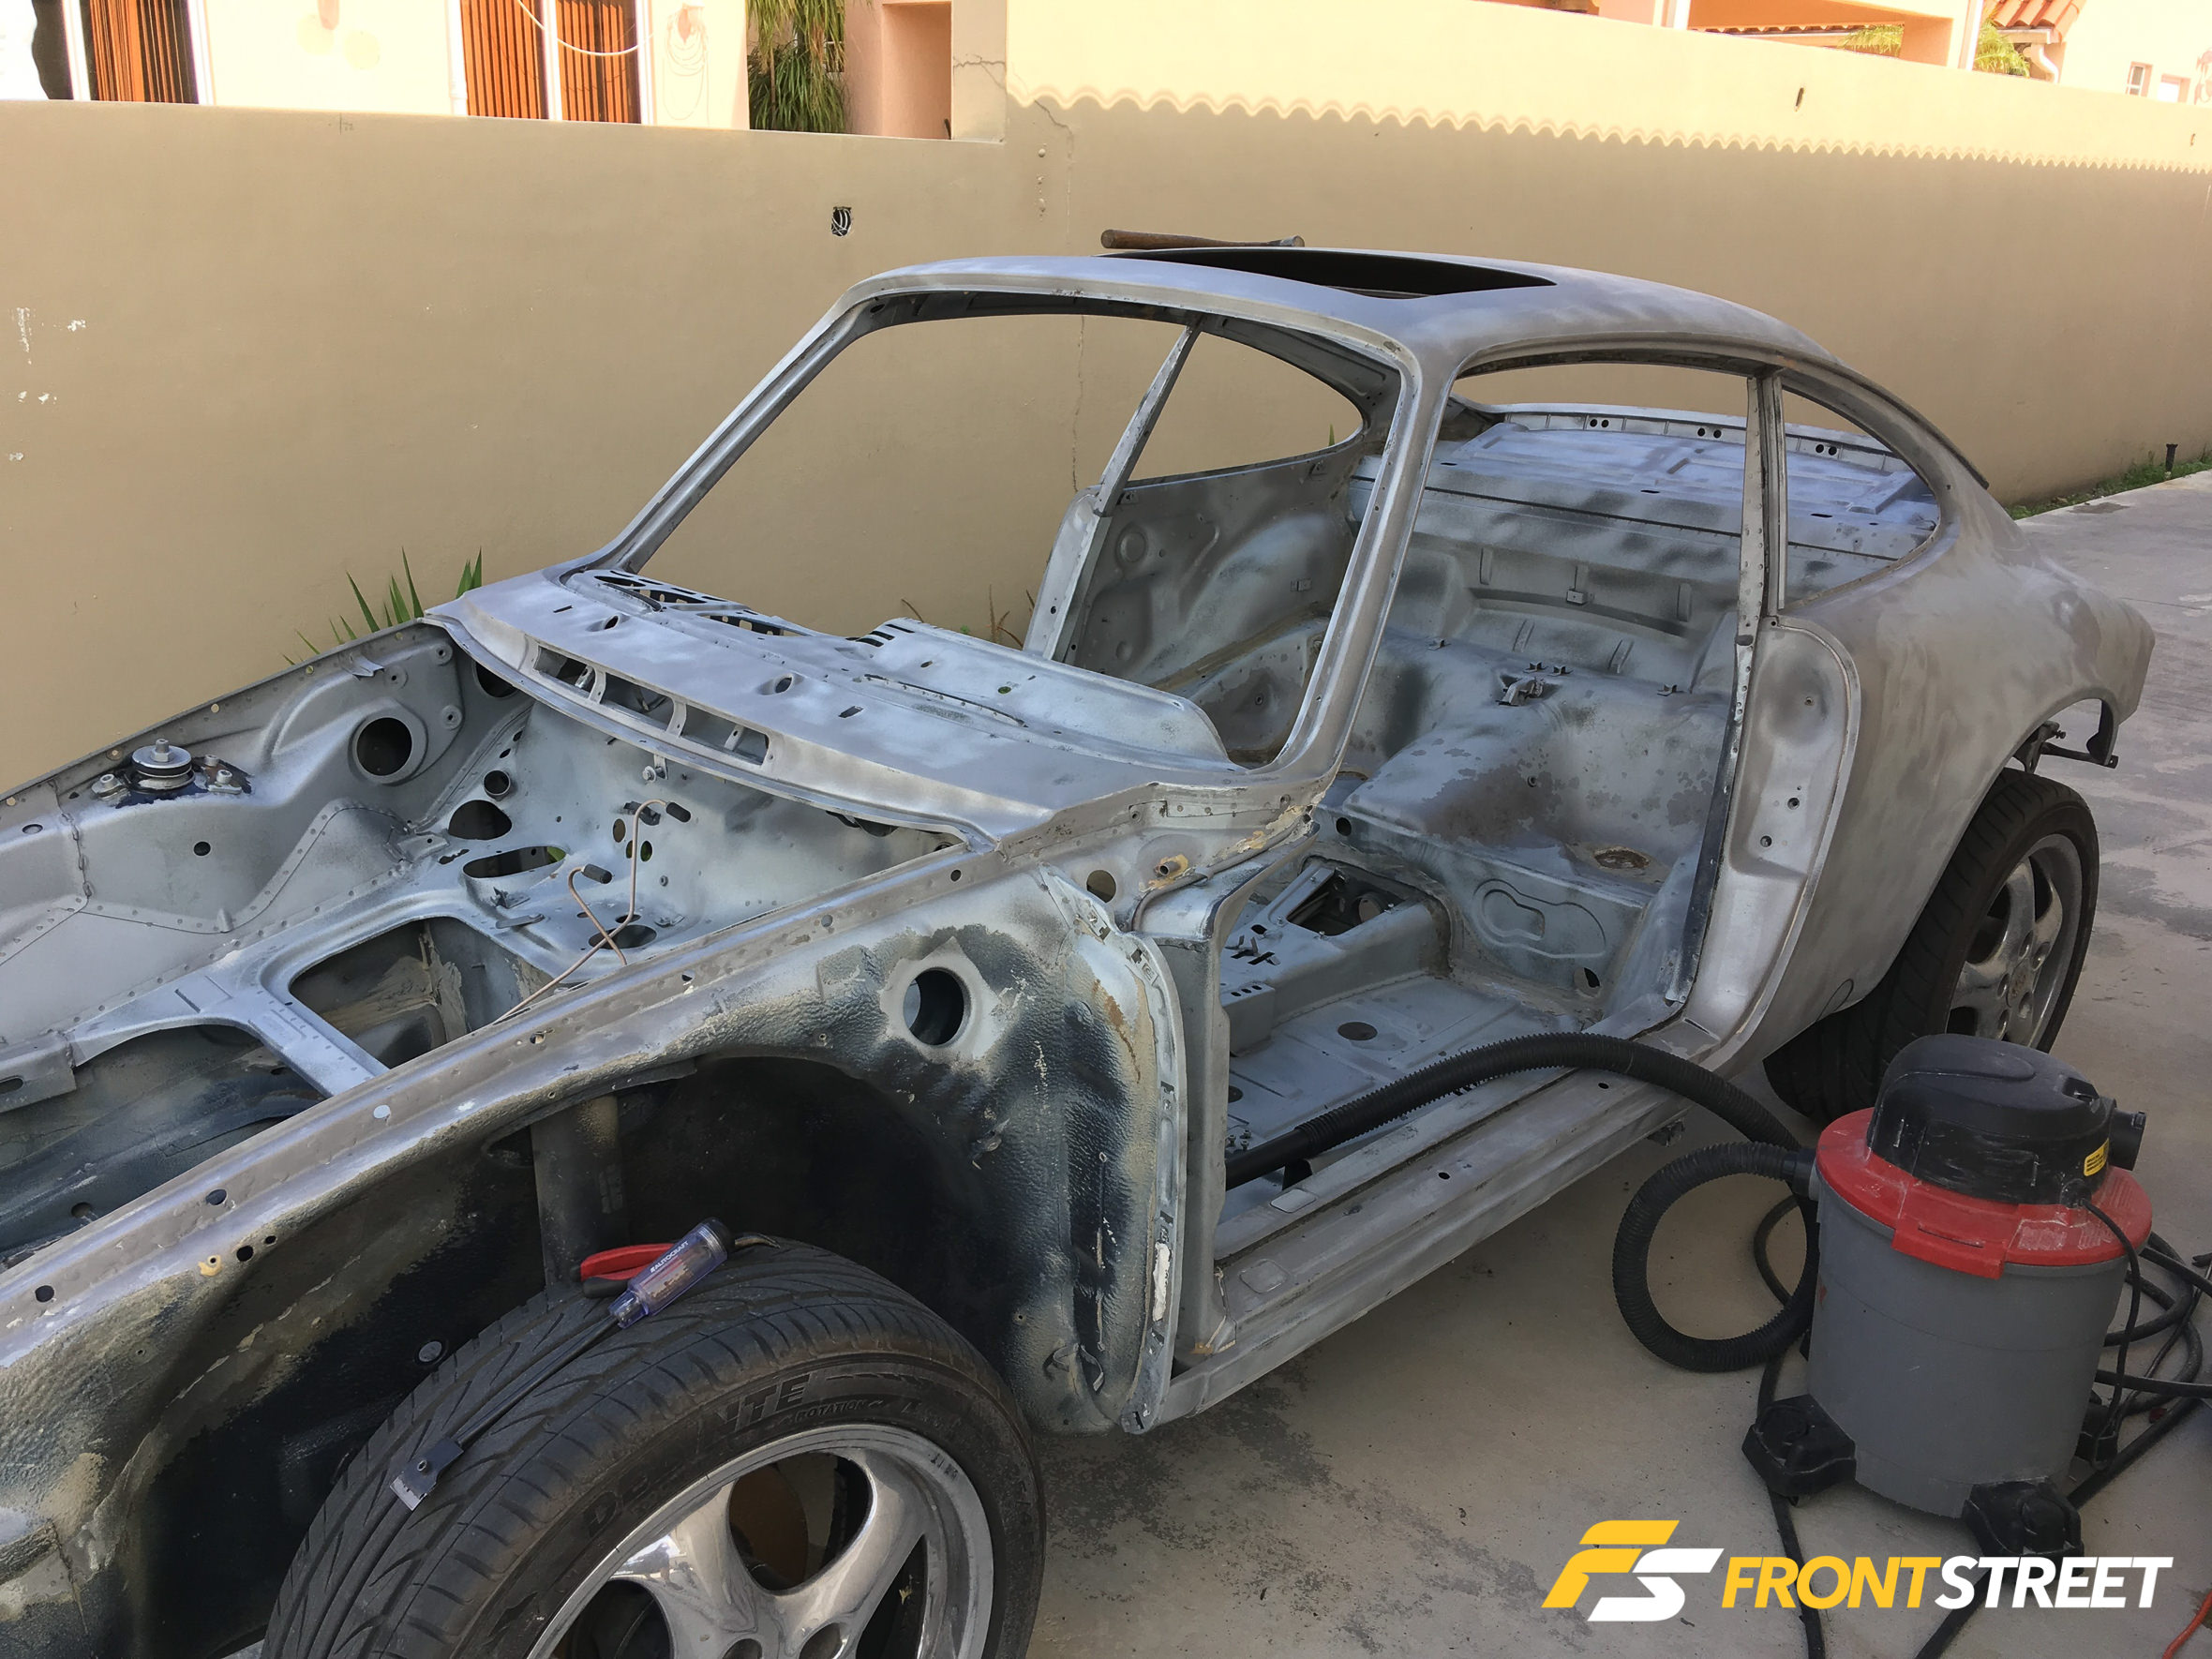 Why The World Needs More Of Alex Aguiar's Tinkered 1985 Porsche 911